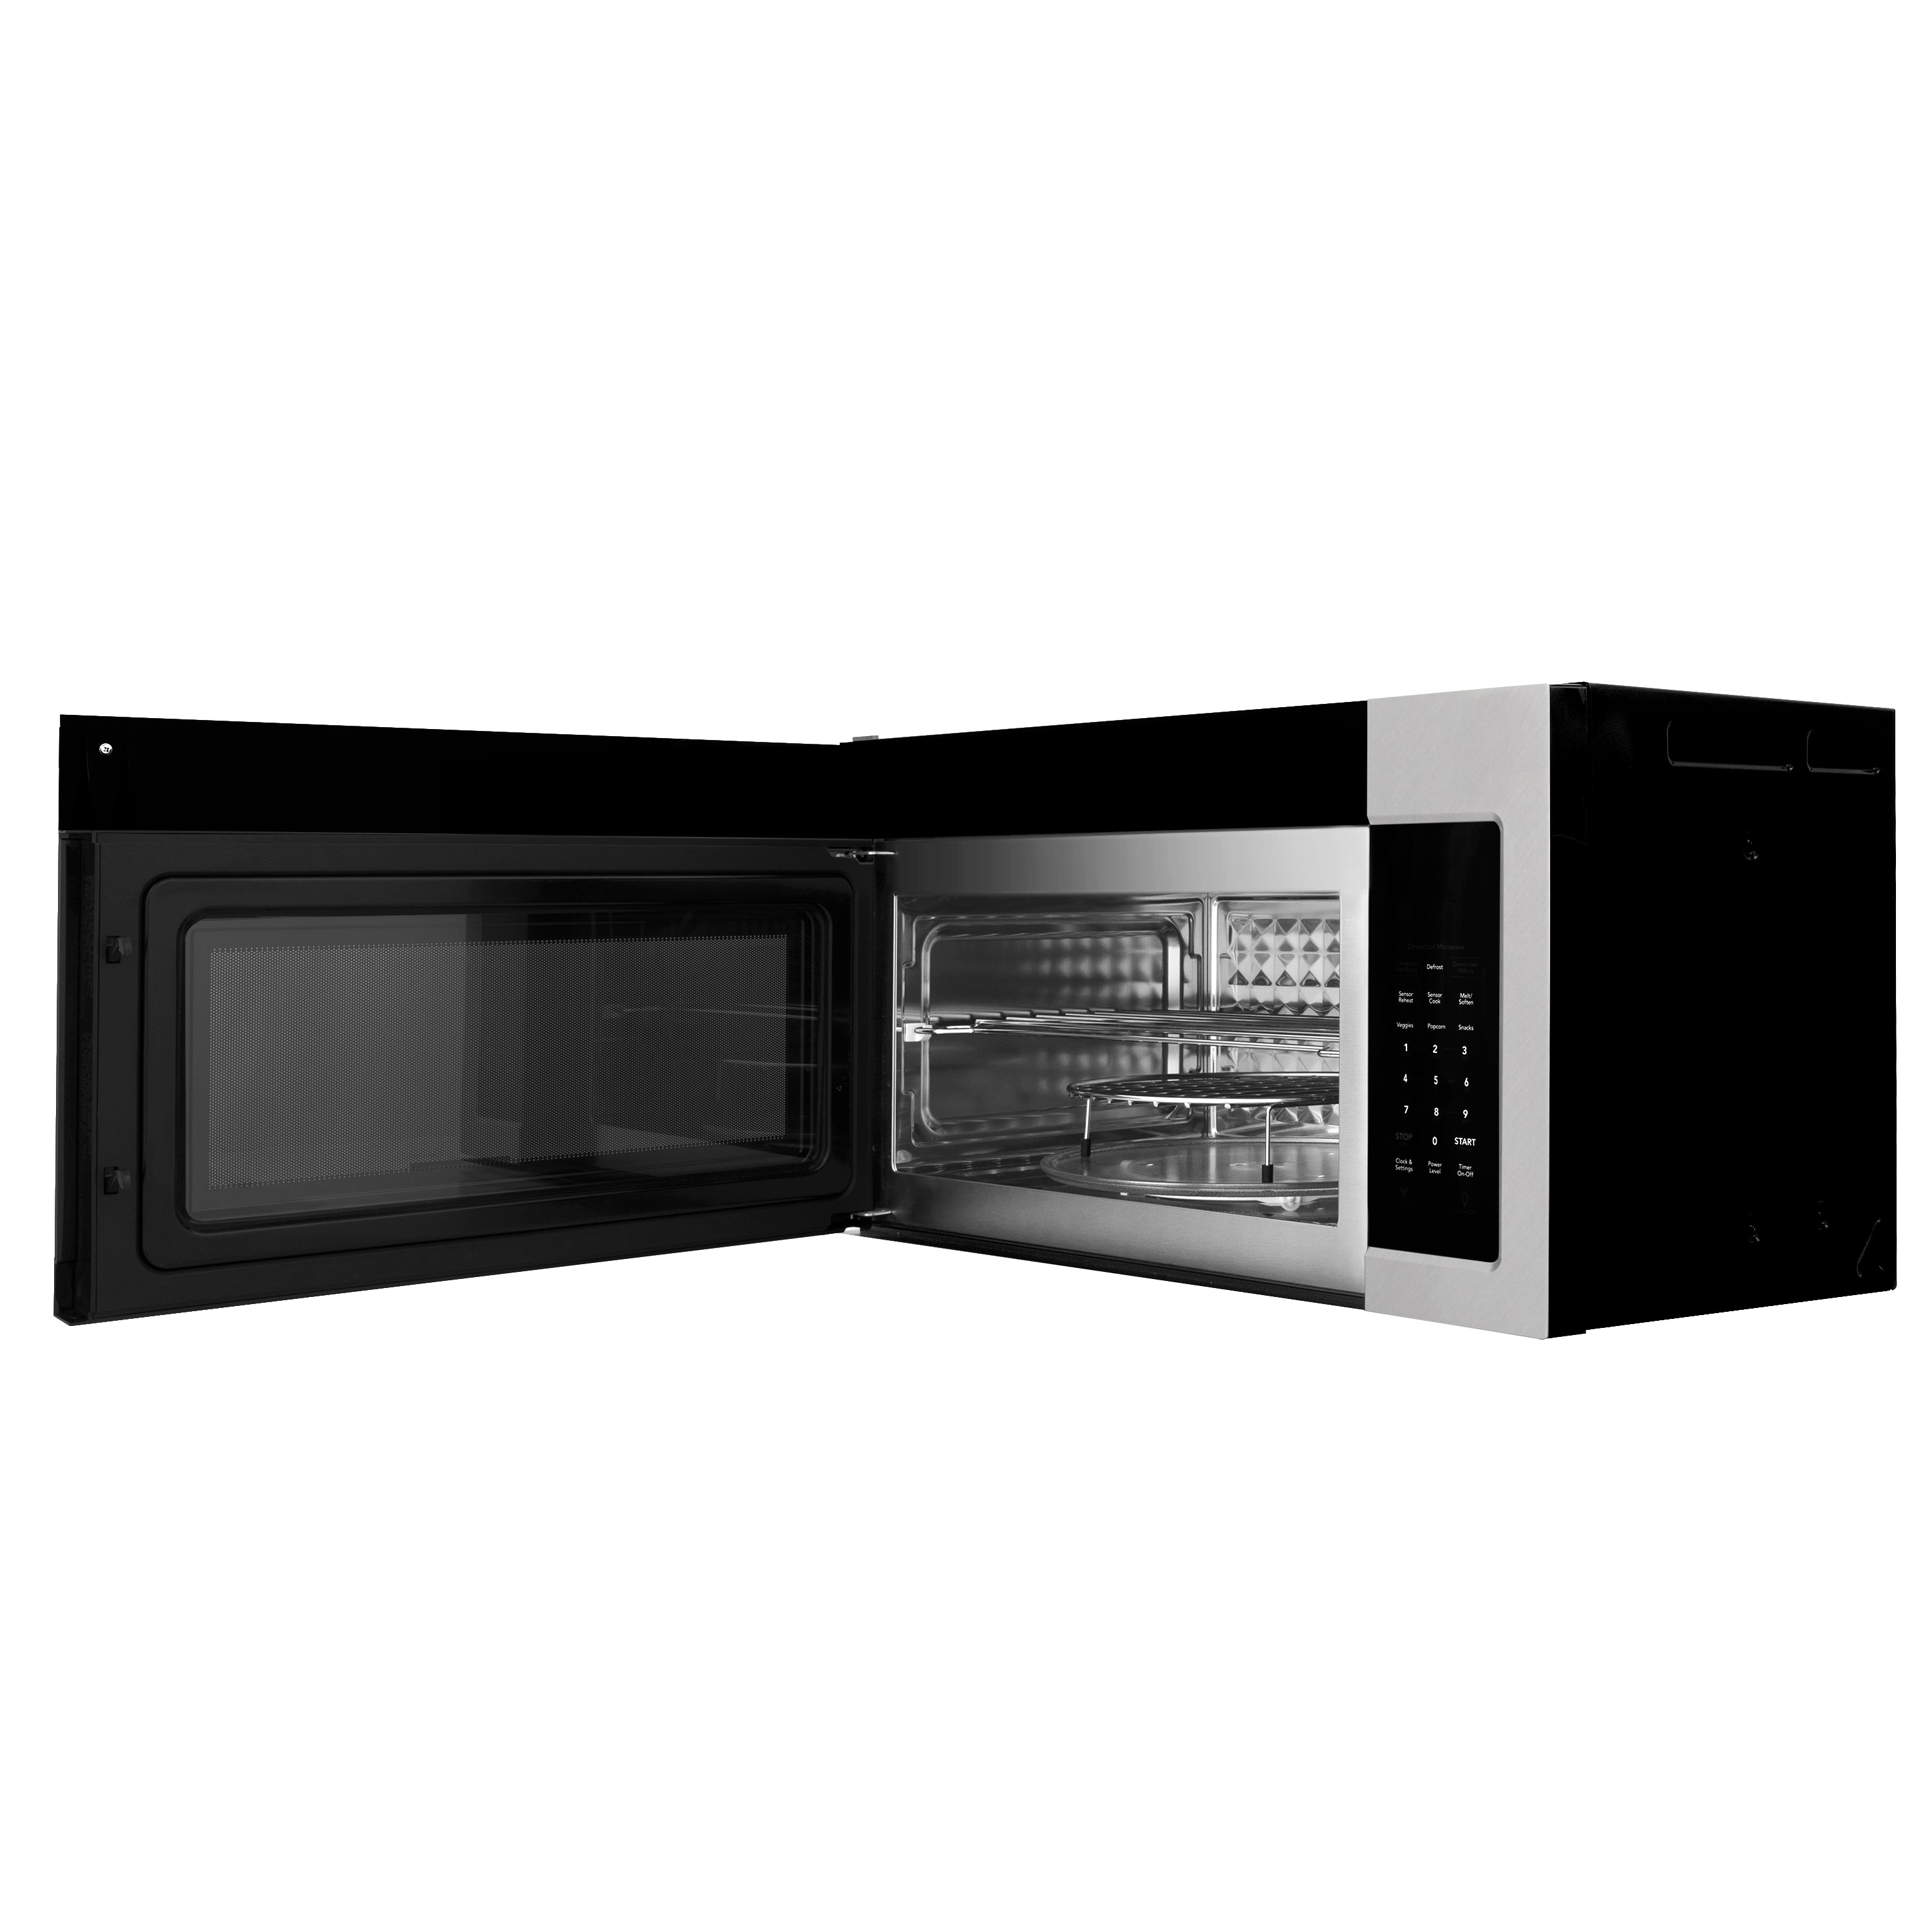 ZLINE 30" 1.5 cu. ft. Over the Range Microwave in Stainless Steel with Modern Handle and Set of 2 Charcoal Filters (MWO-OTRCF-30)